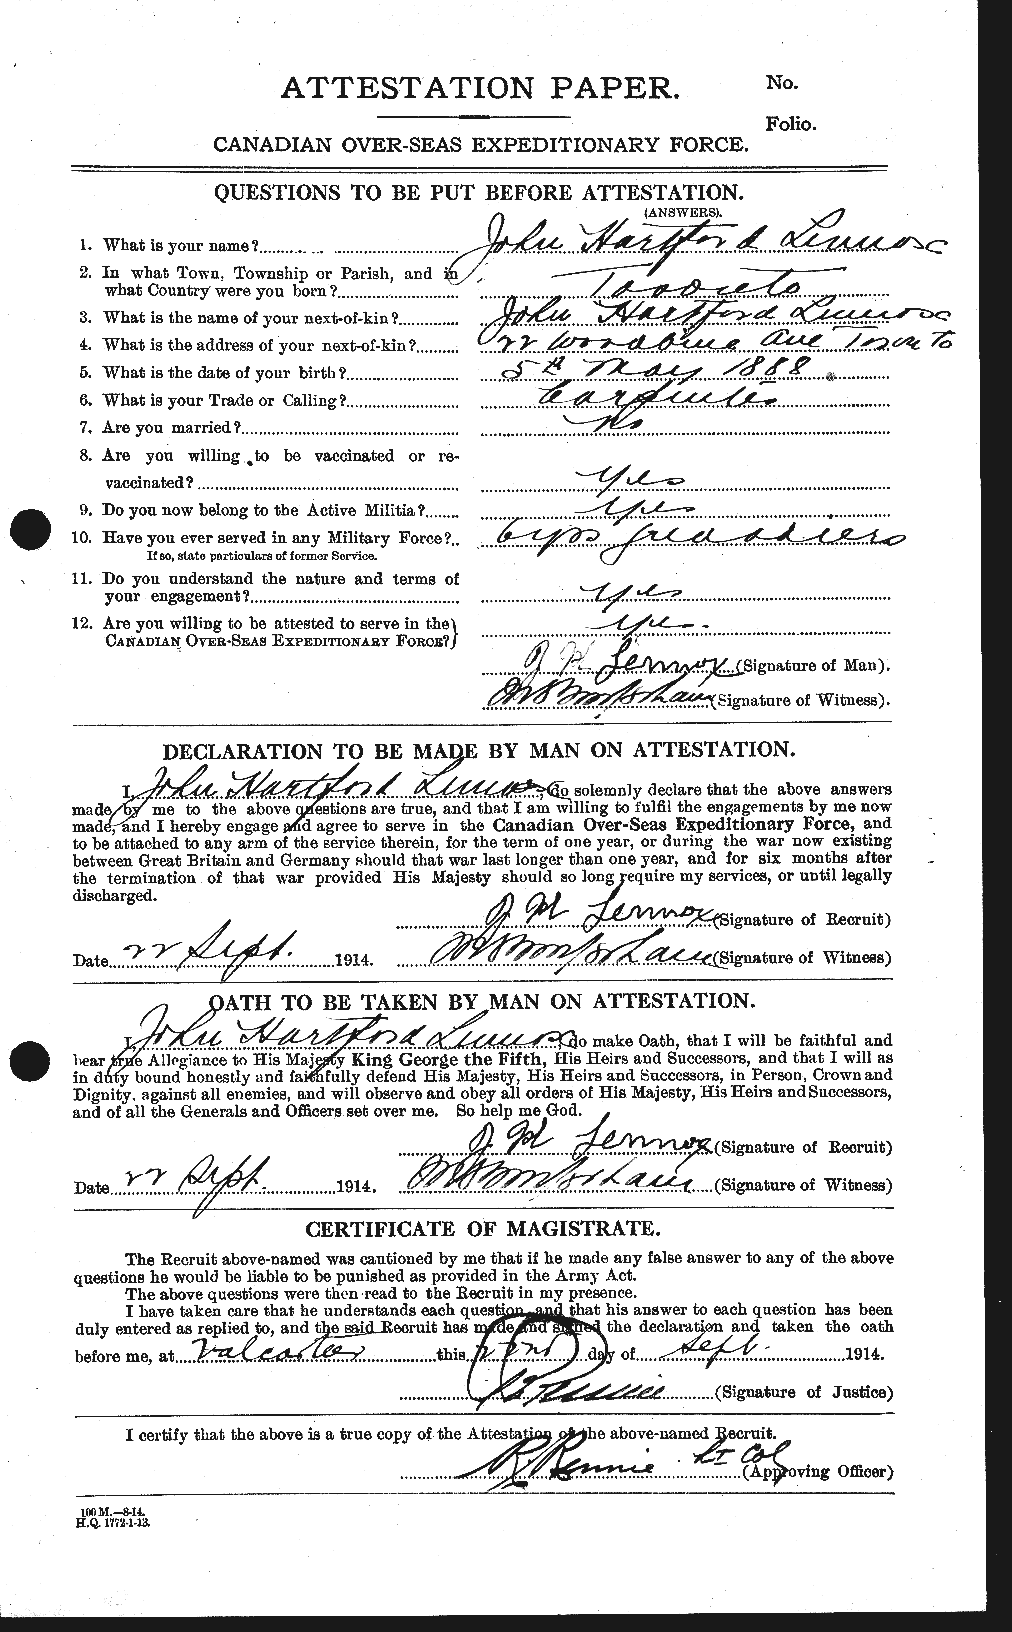 Personnel Records of the First World War - CEF 458686a